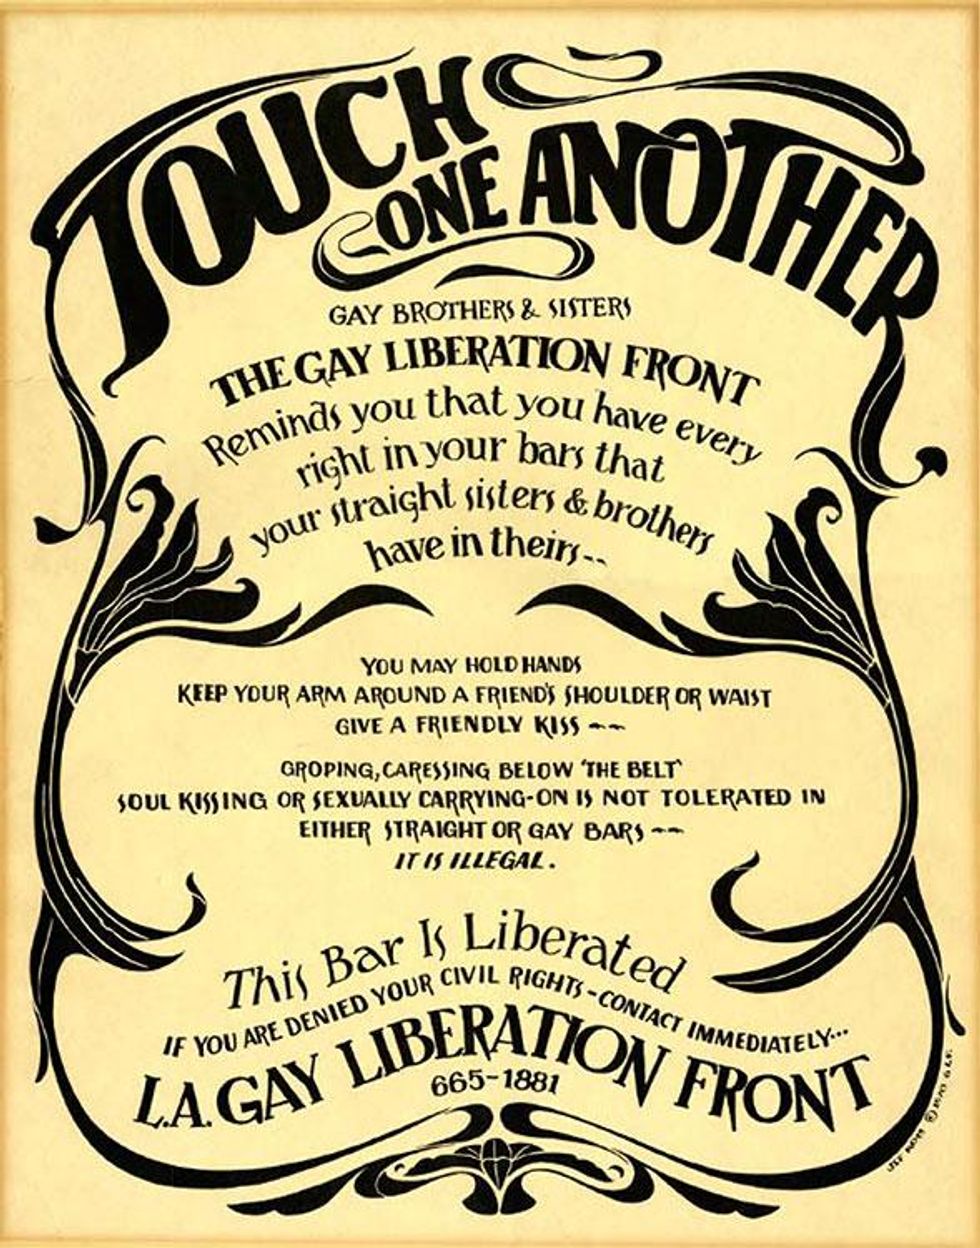 Los Angeles Gay Liberation Front Poster, 1970. Courtesy of ONE Archives at USC Libraries.